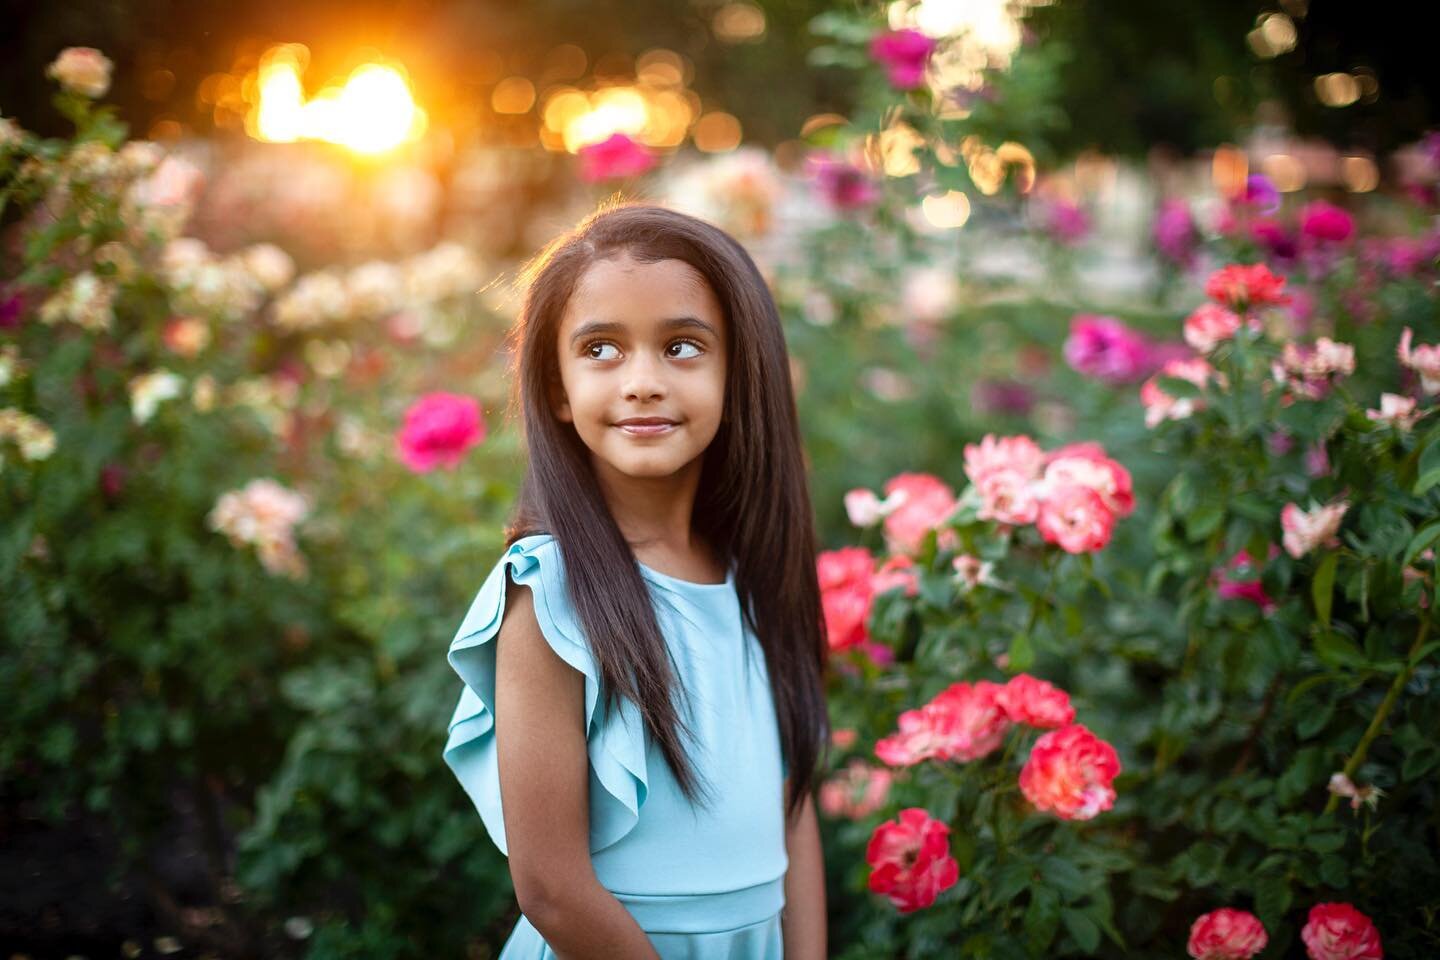 Happy birthday to the birthday girl! I met up with @lady_j999 and her daughter at sunset at the MCC rose garden last week and oh! it was beautiful and fun to take photos for them there! 🌹🎂🎈🌹🎂🎈

#rosegarden #mesacommunitycollegerosegarden